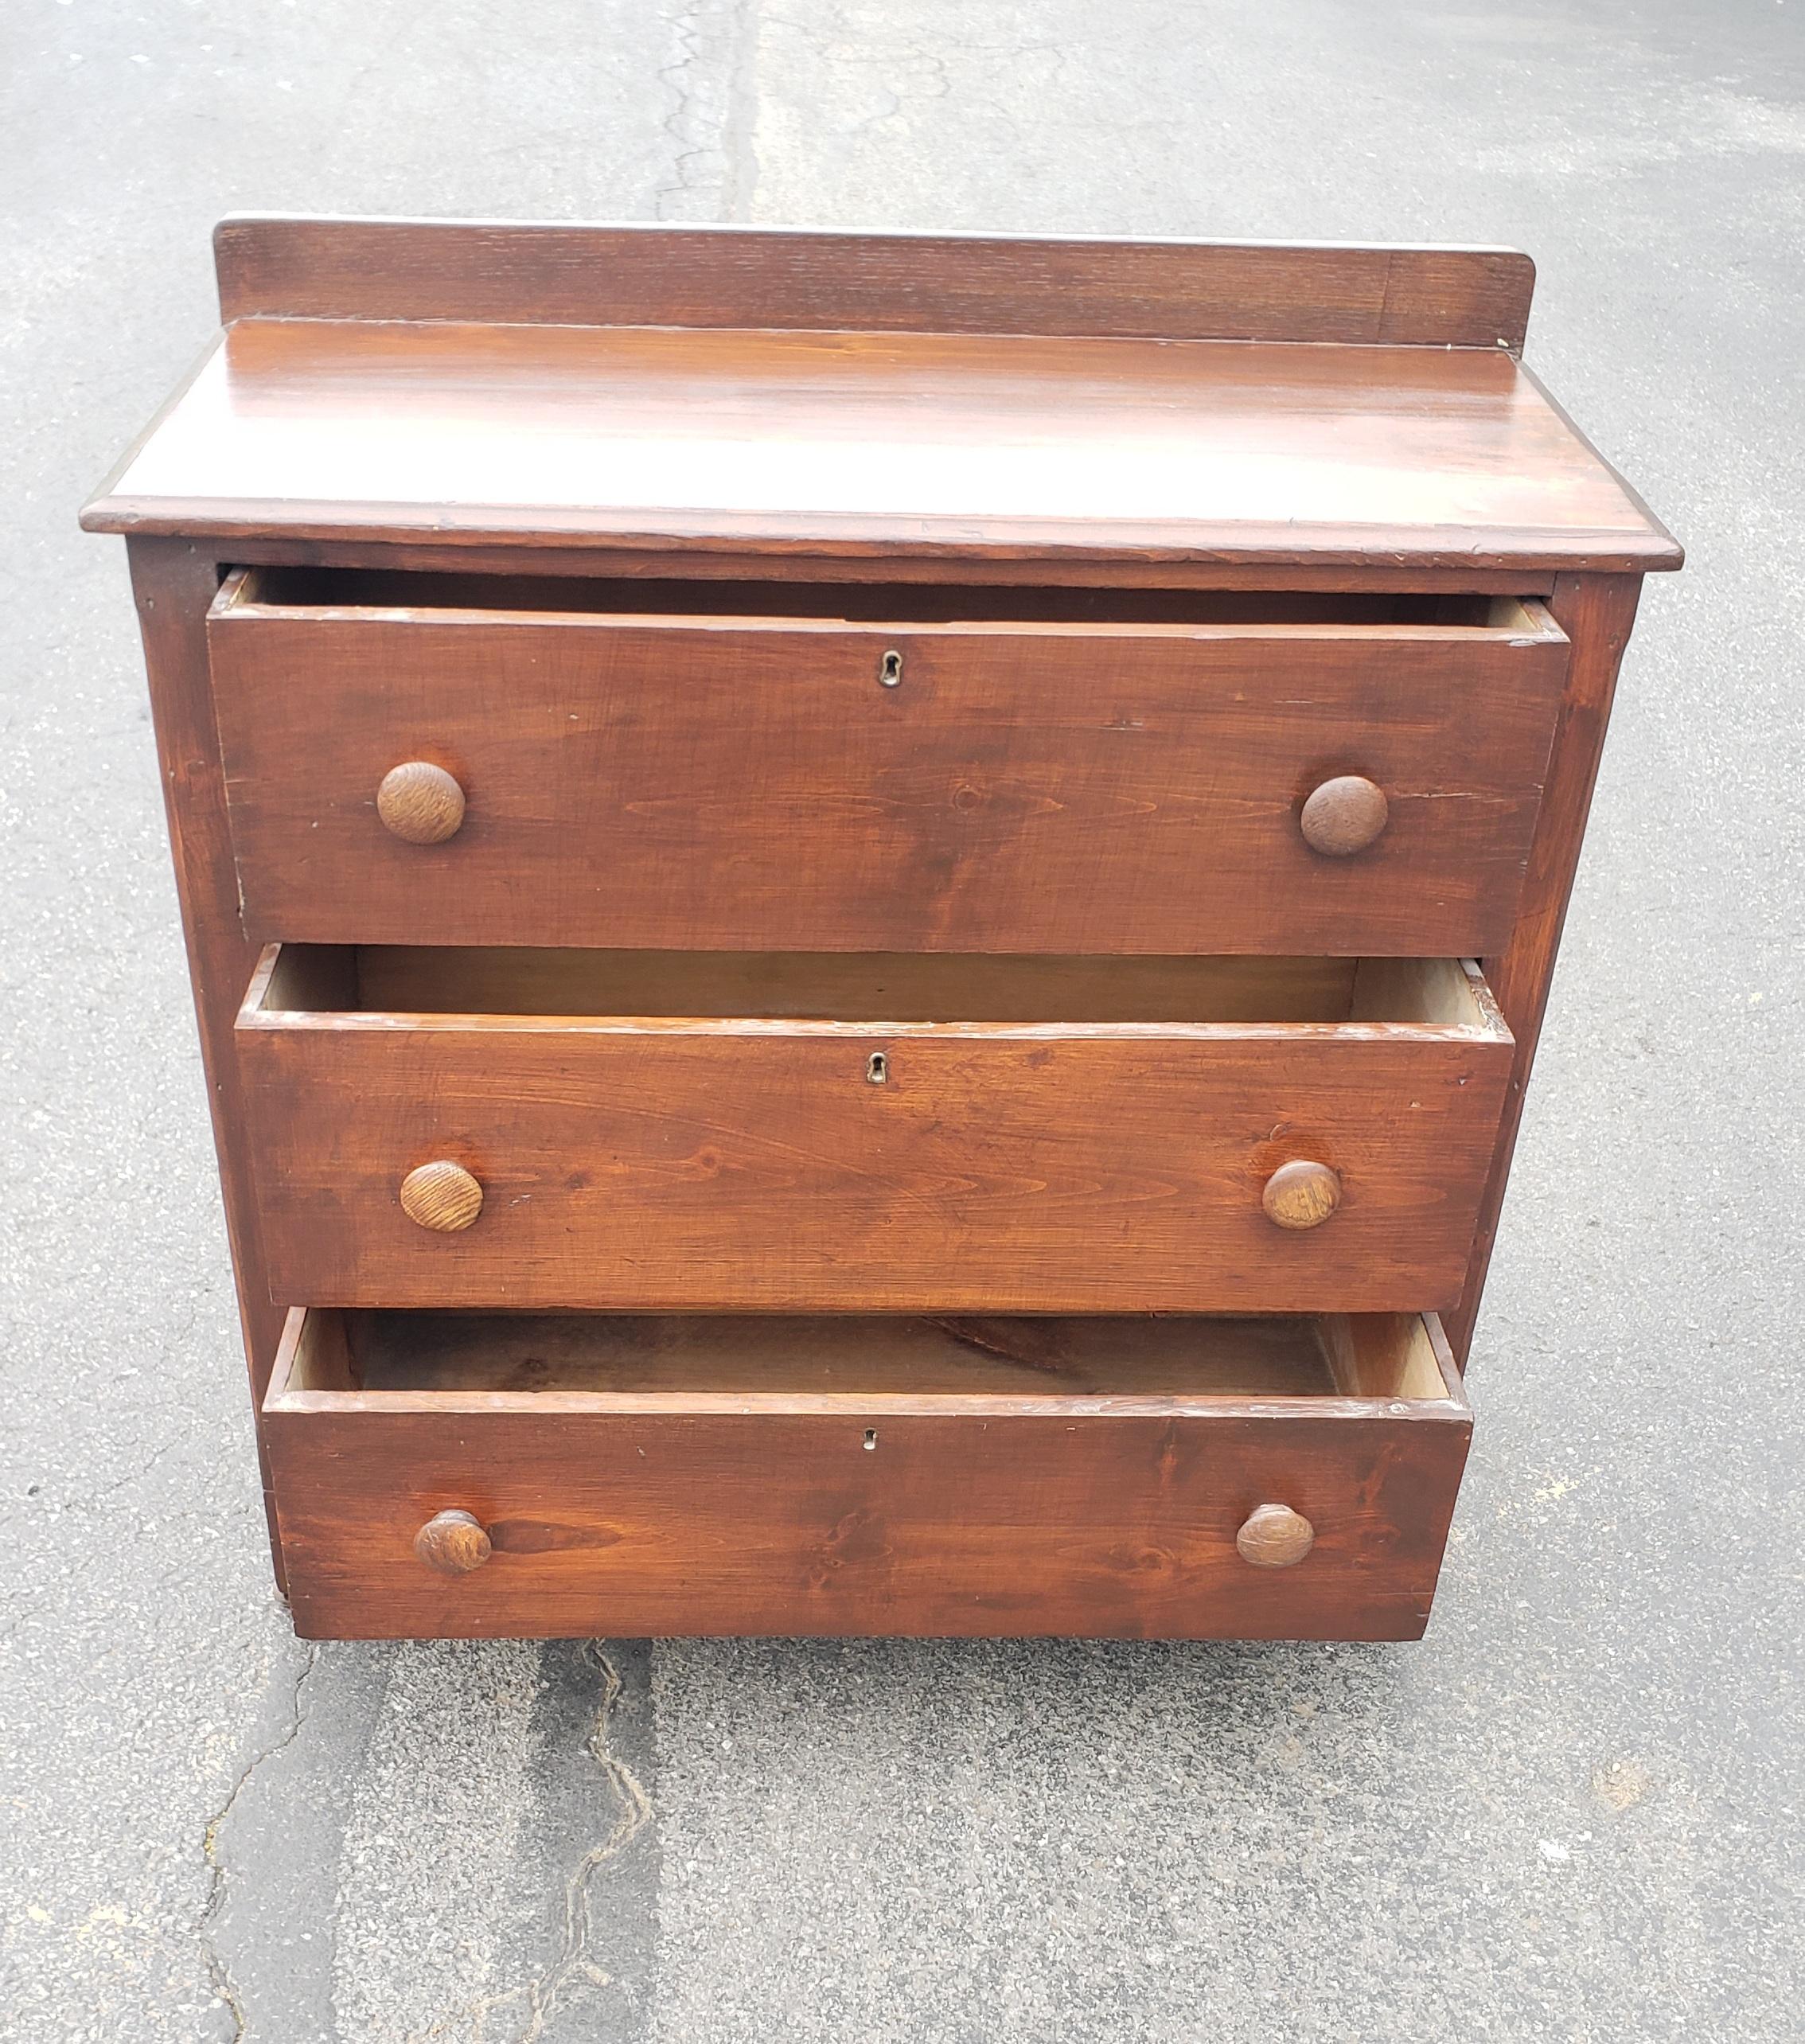 19th century early American red pine chest of drawers on wheels with pegged joints drawers. Good antique condition. Measures 35.5